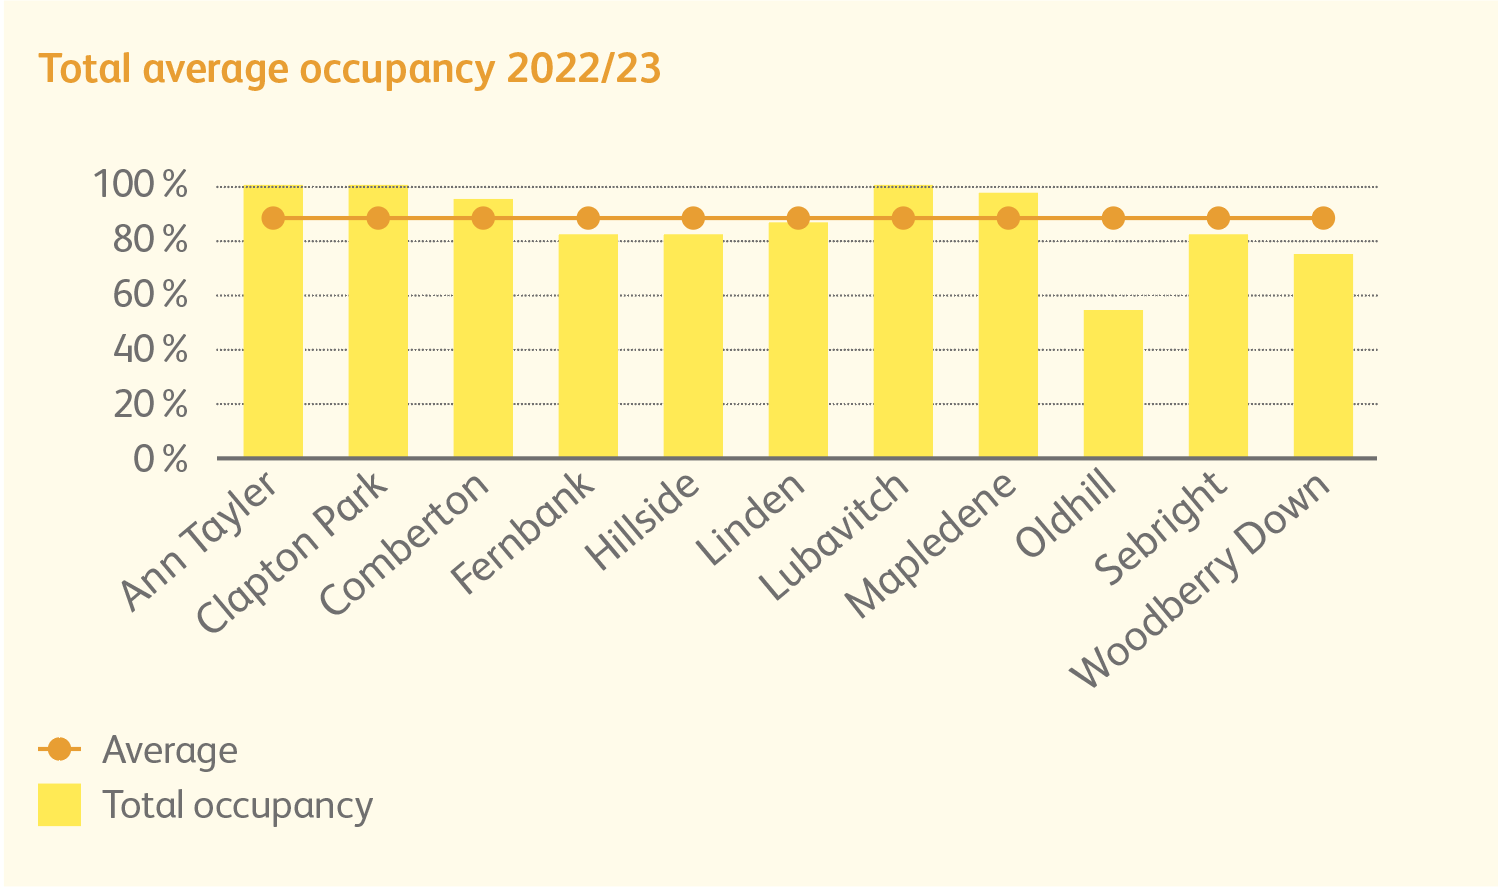 Graph shows the average occupancy of children's centres in 2022/23